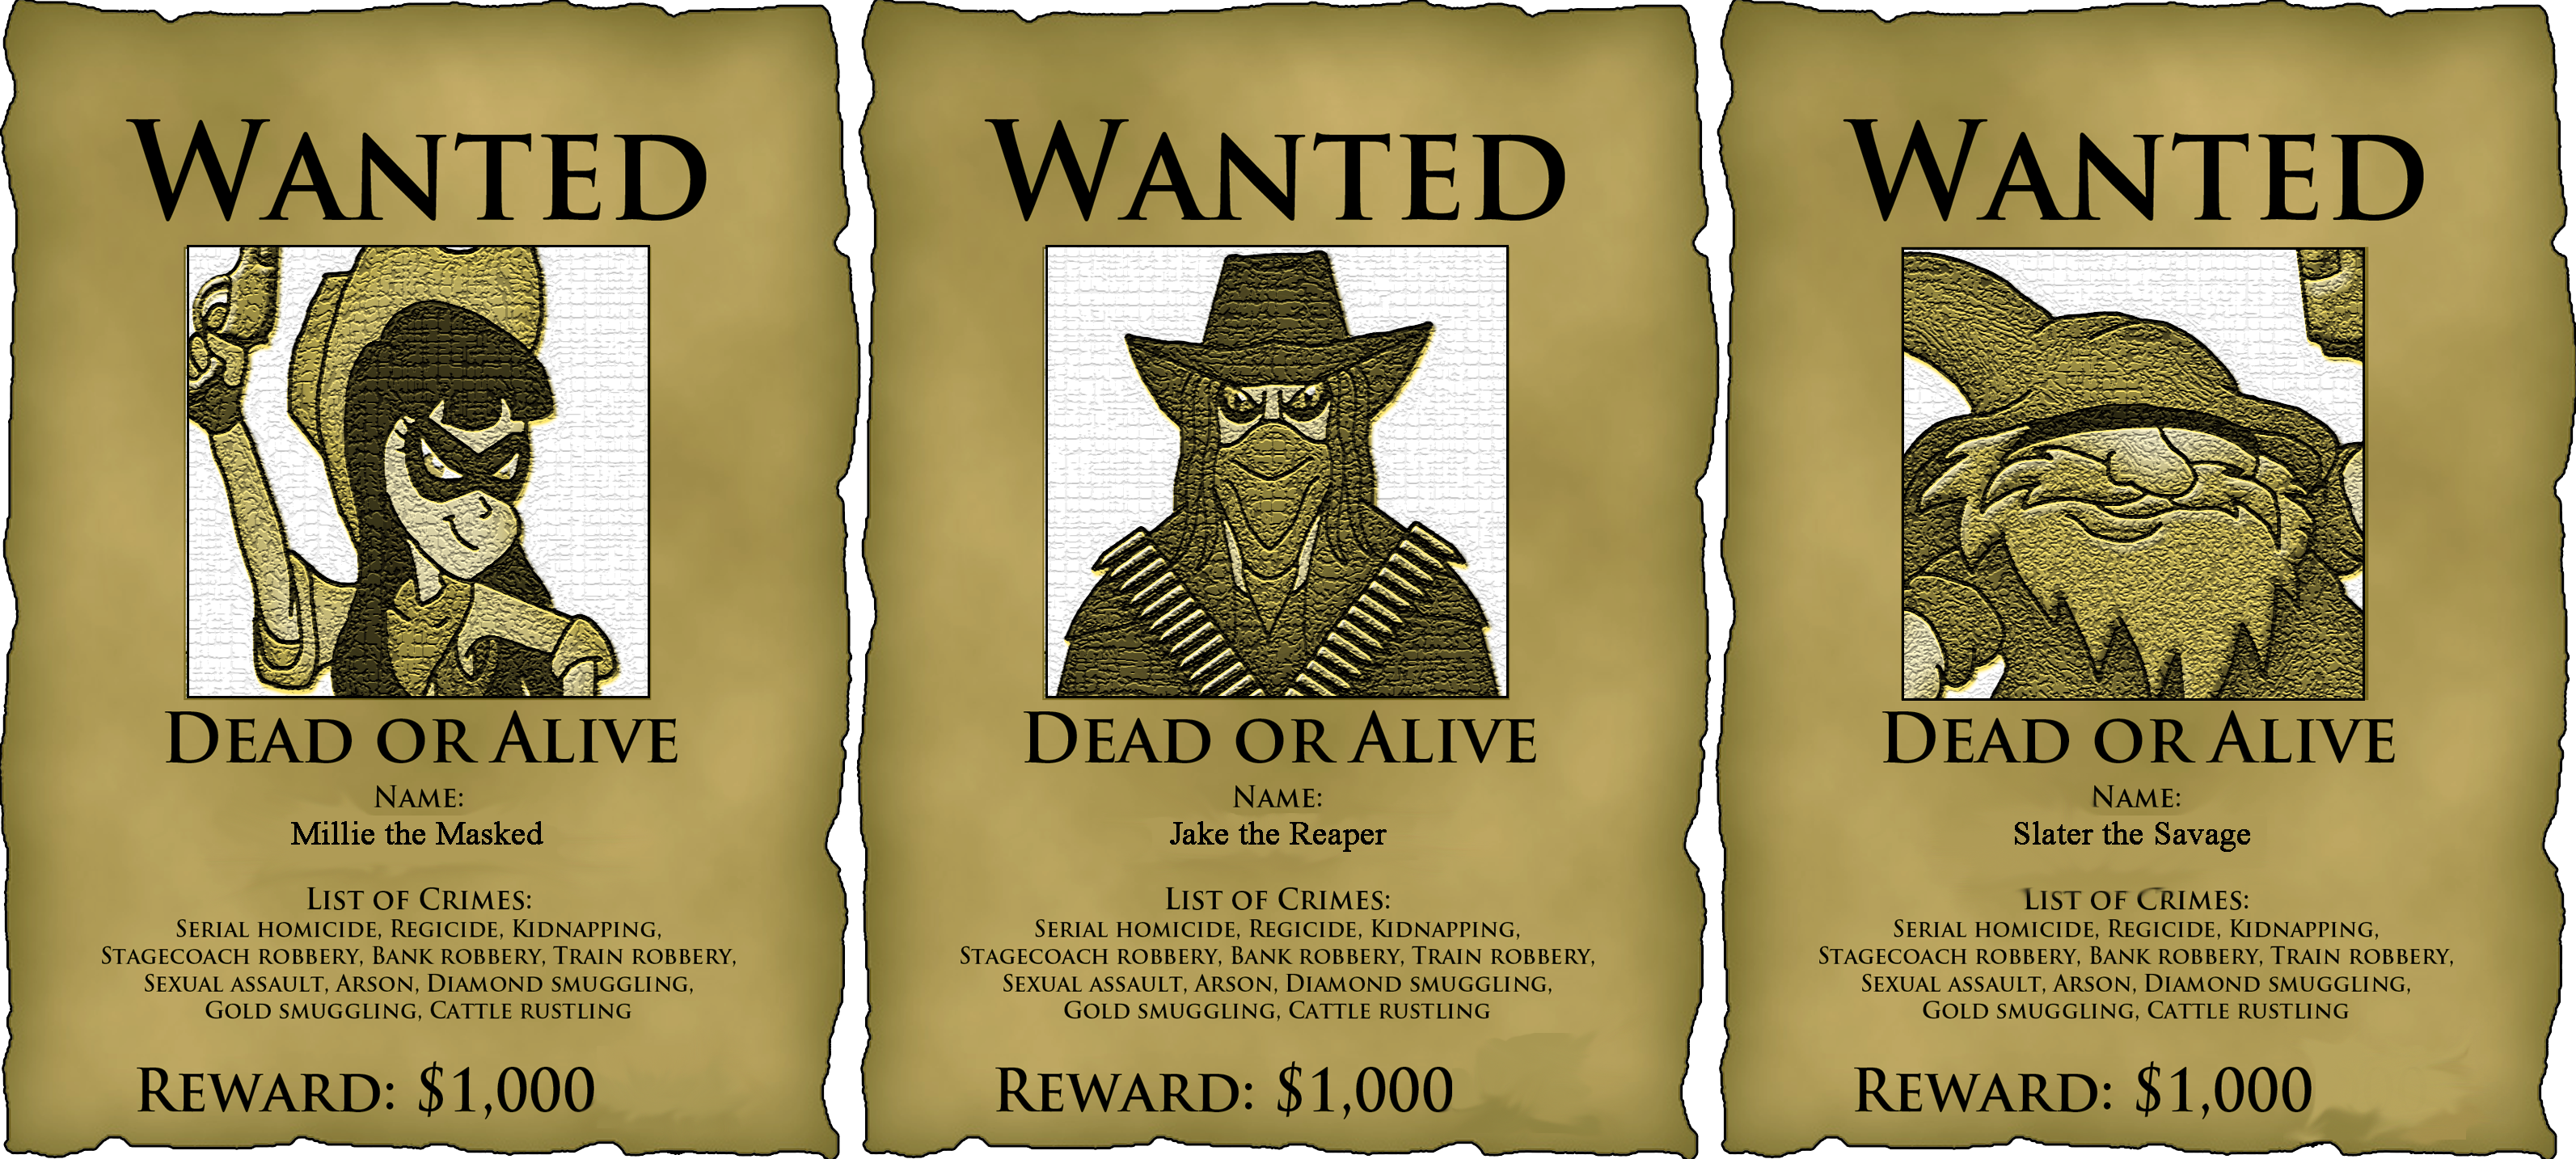 Lived talked wanted. Wanted плакат. Плакат розыска. Плакат разыскивается дикий Запад. Wanted картинка.